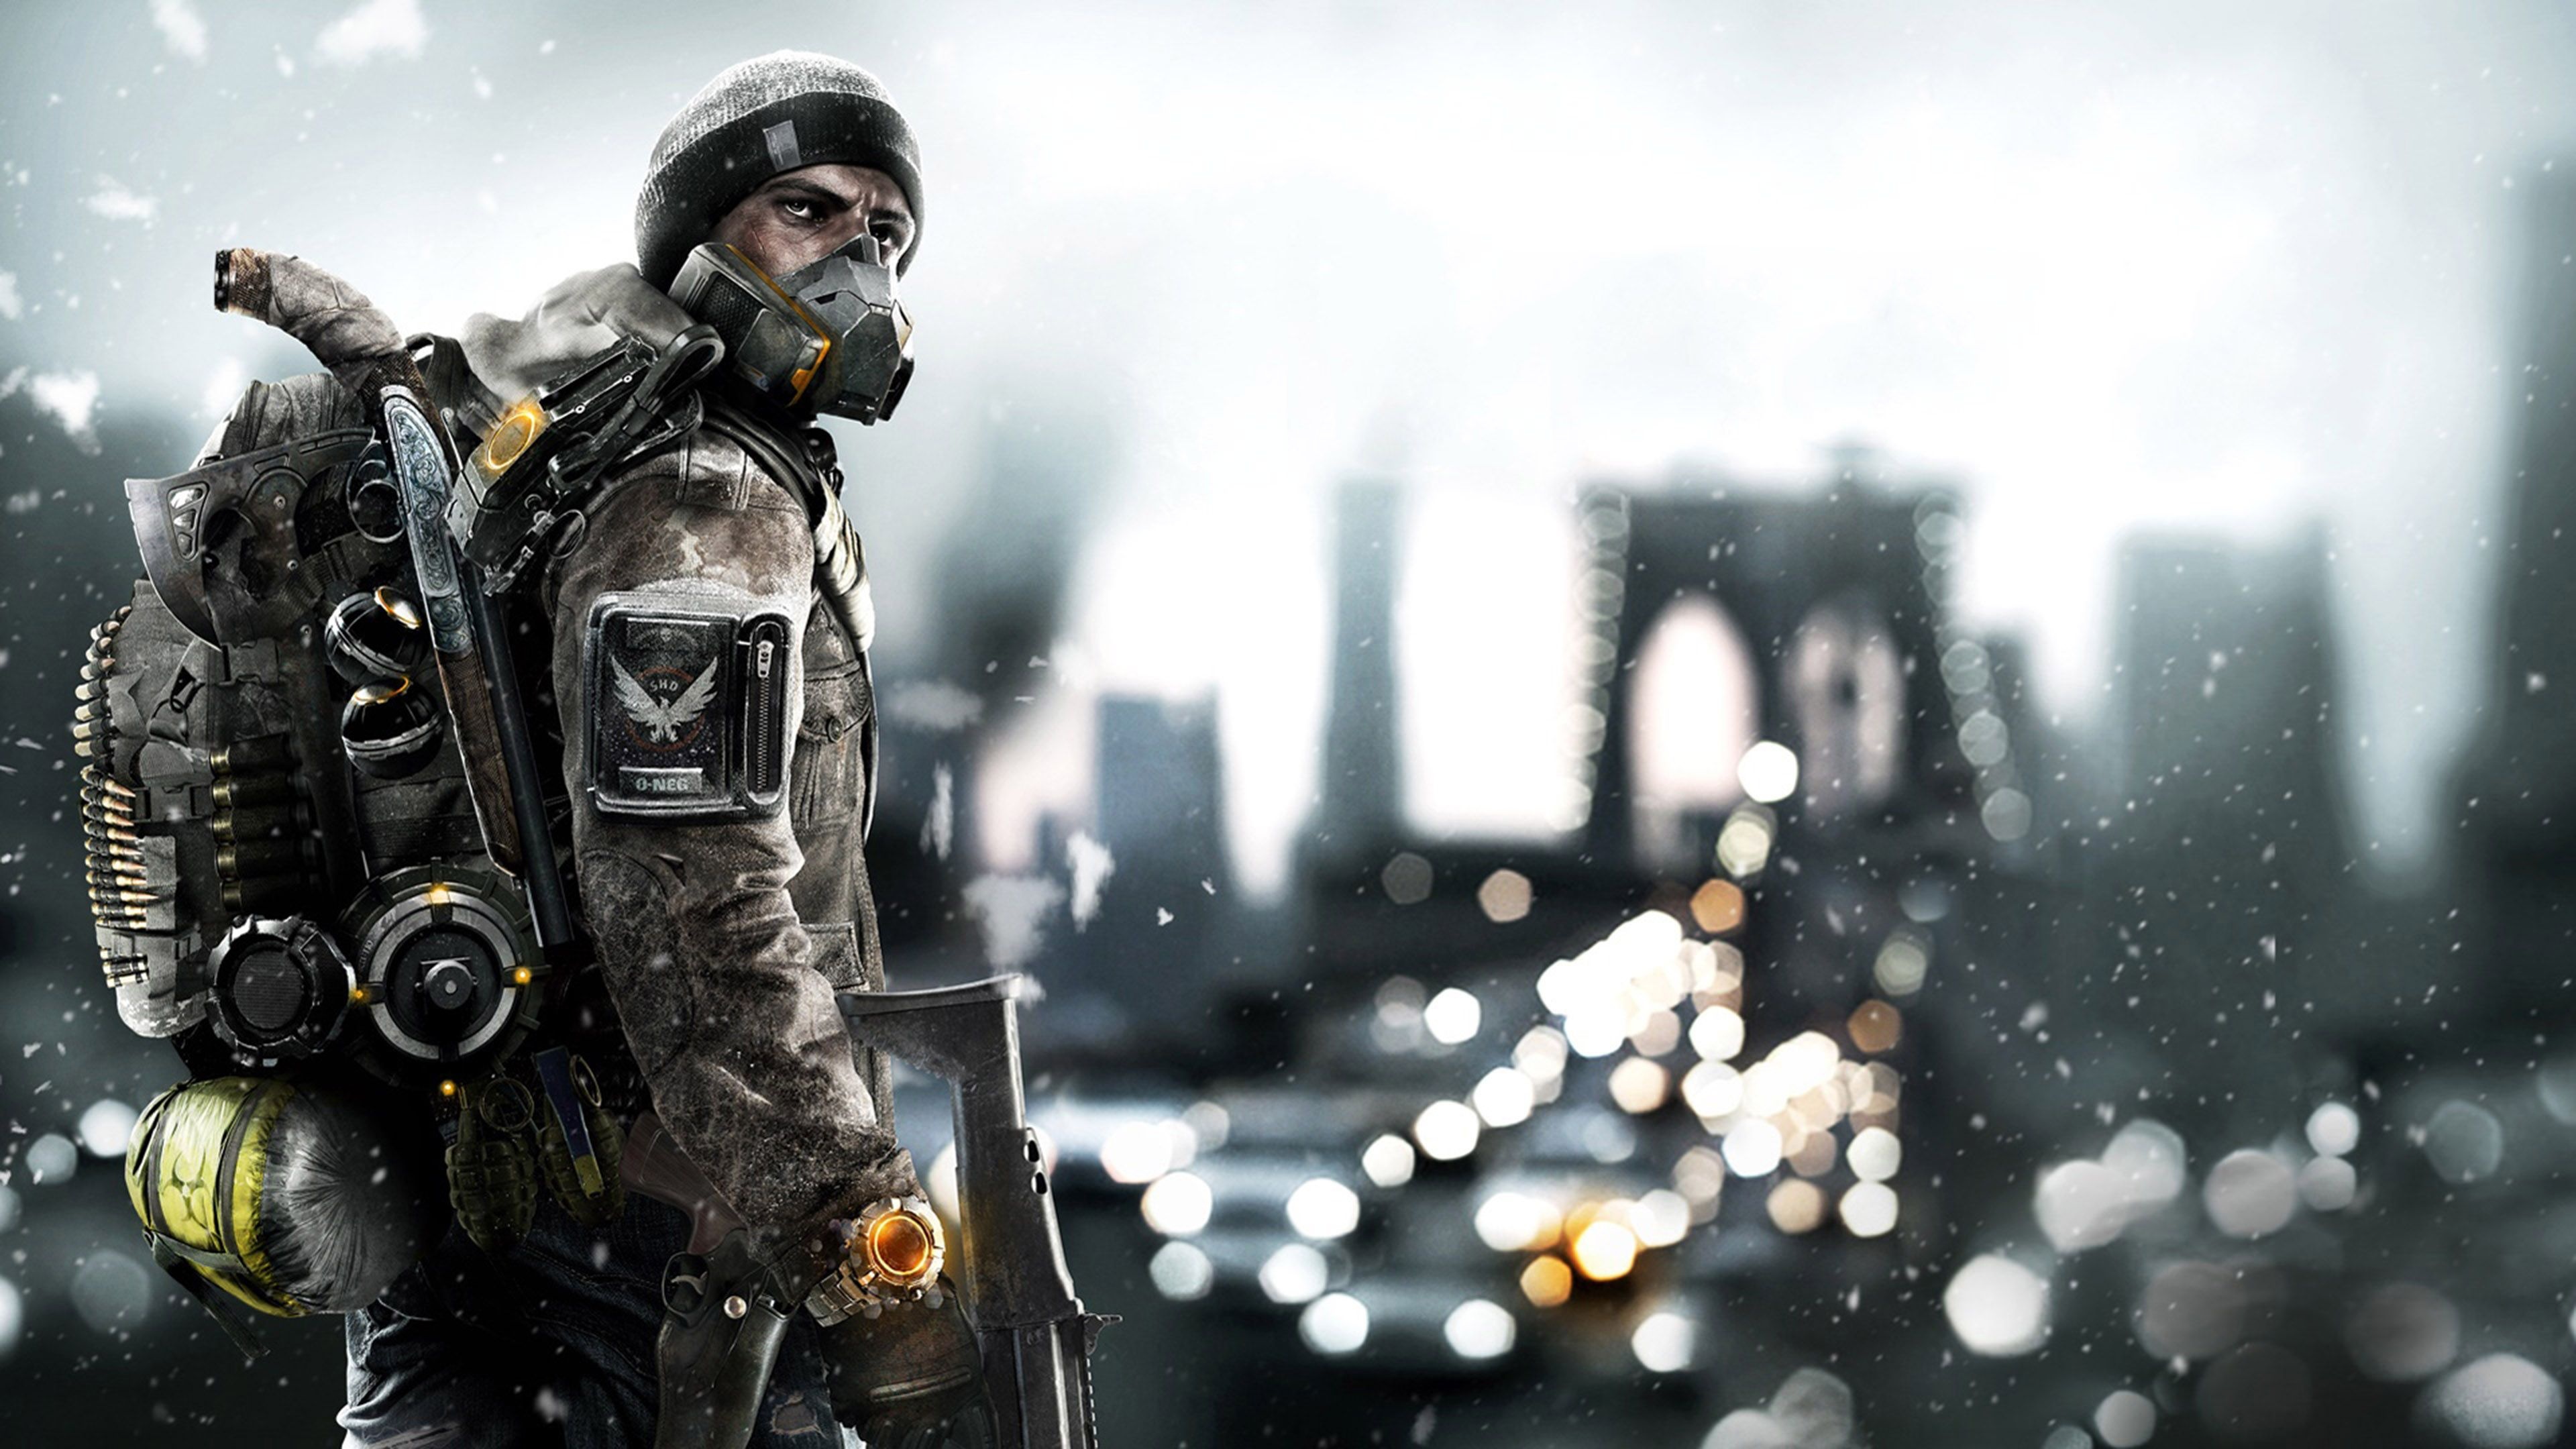 Gaming wallpapers, Action-packed games, Shooter games, HD backgrounds, 3840x2160 4K Desktop